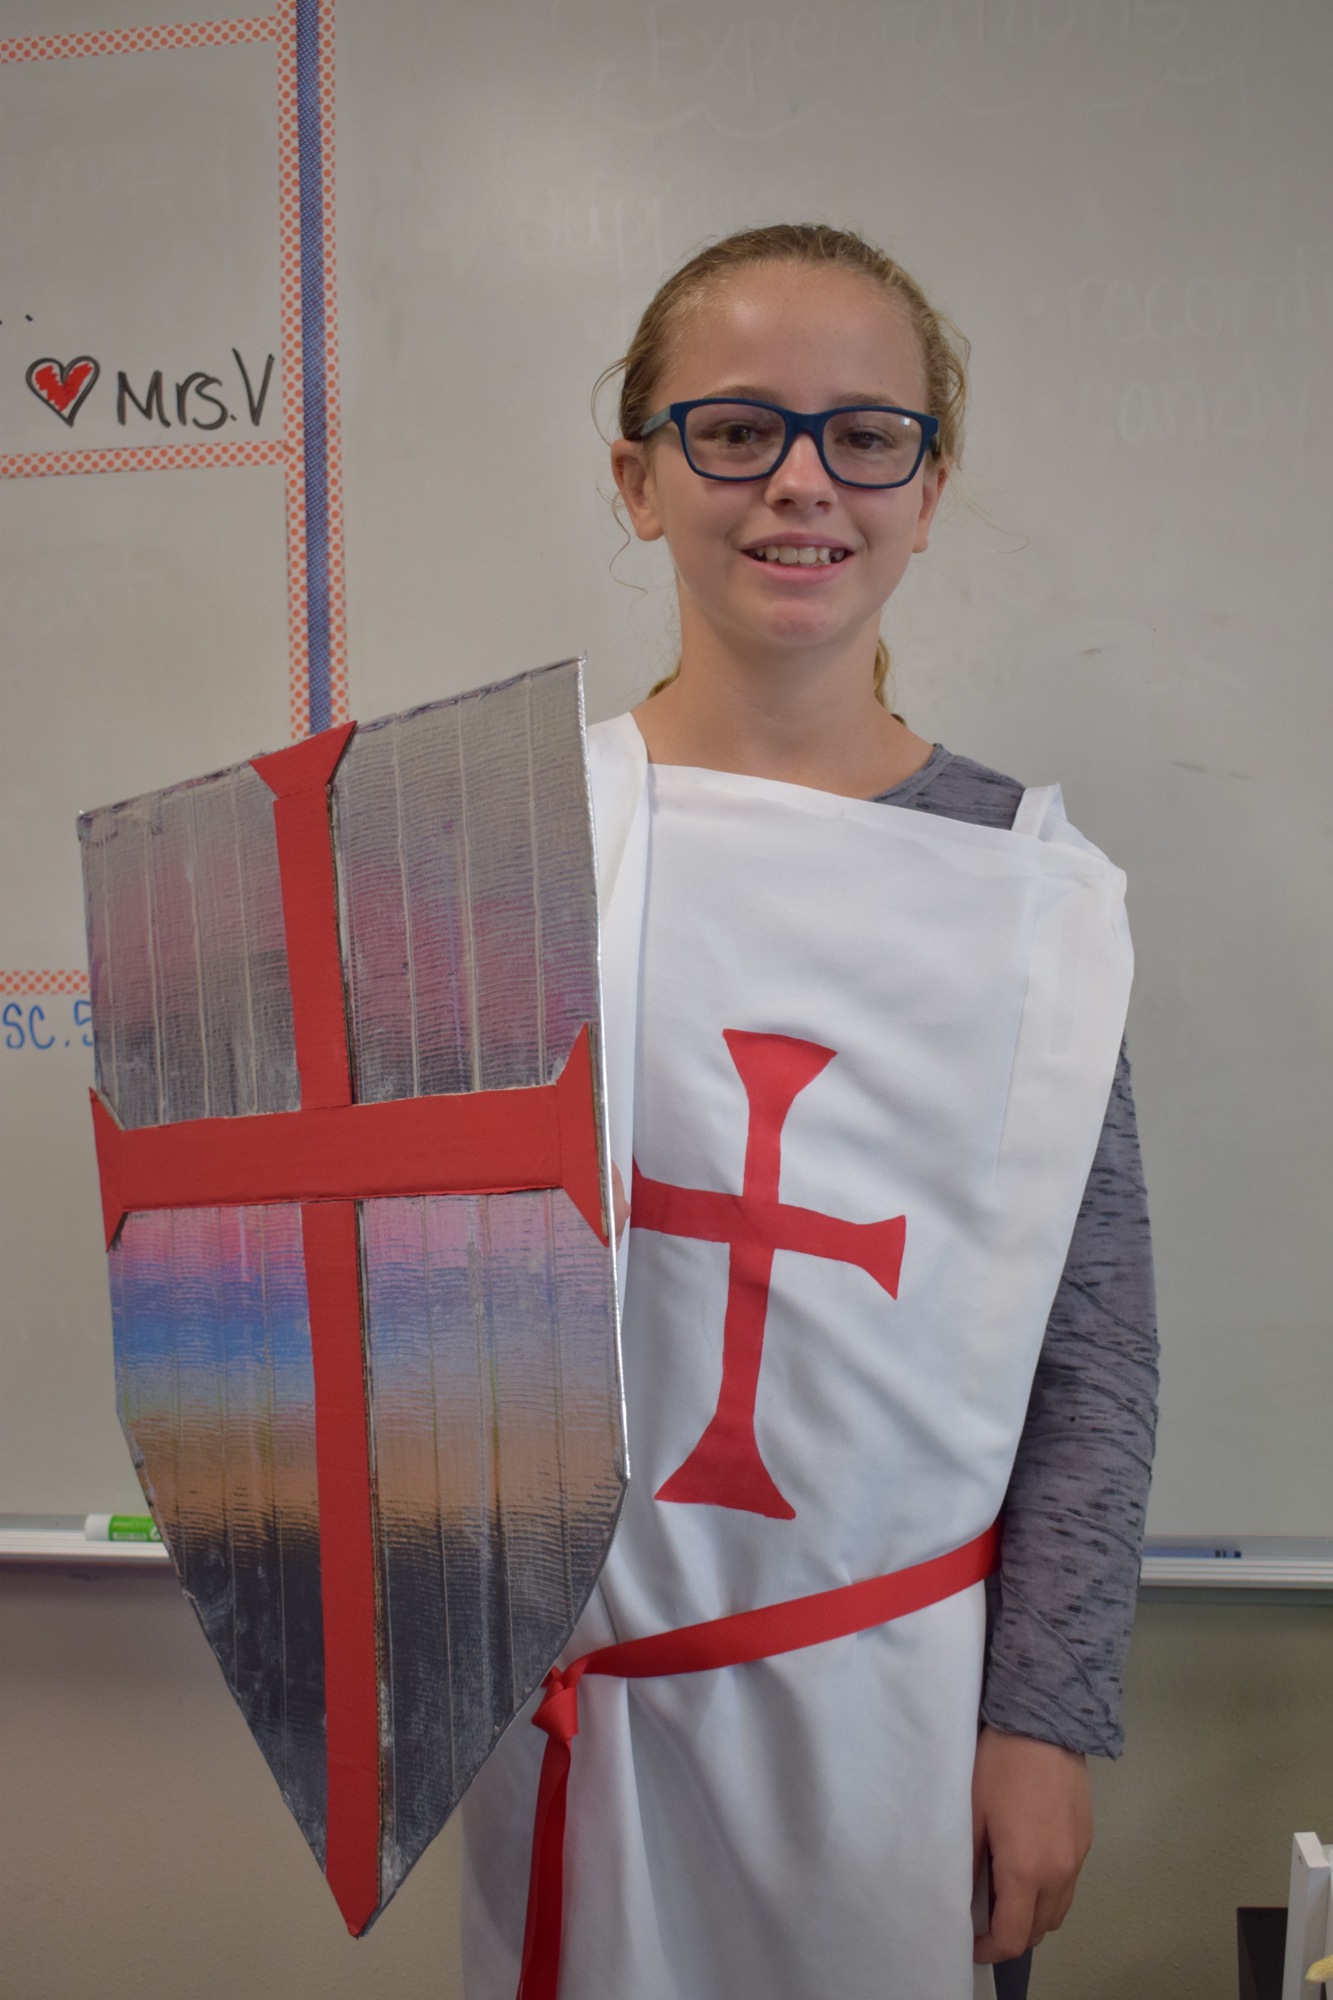 Payton Williams shows girls can do anything boys can through her presentation as Joan of Arc.